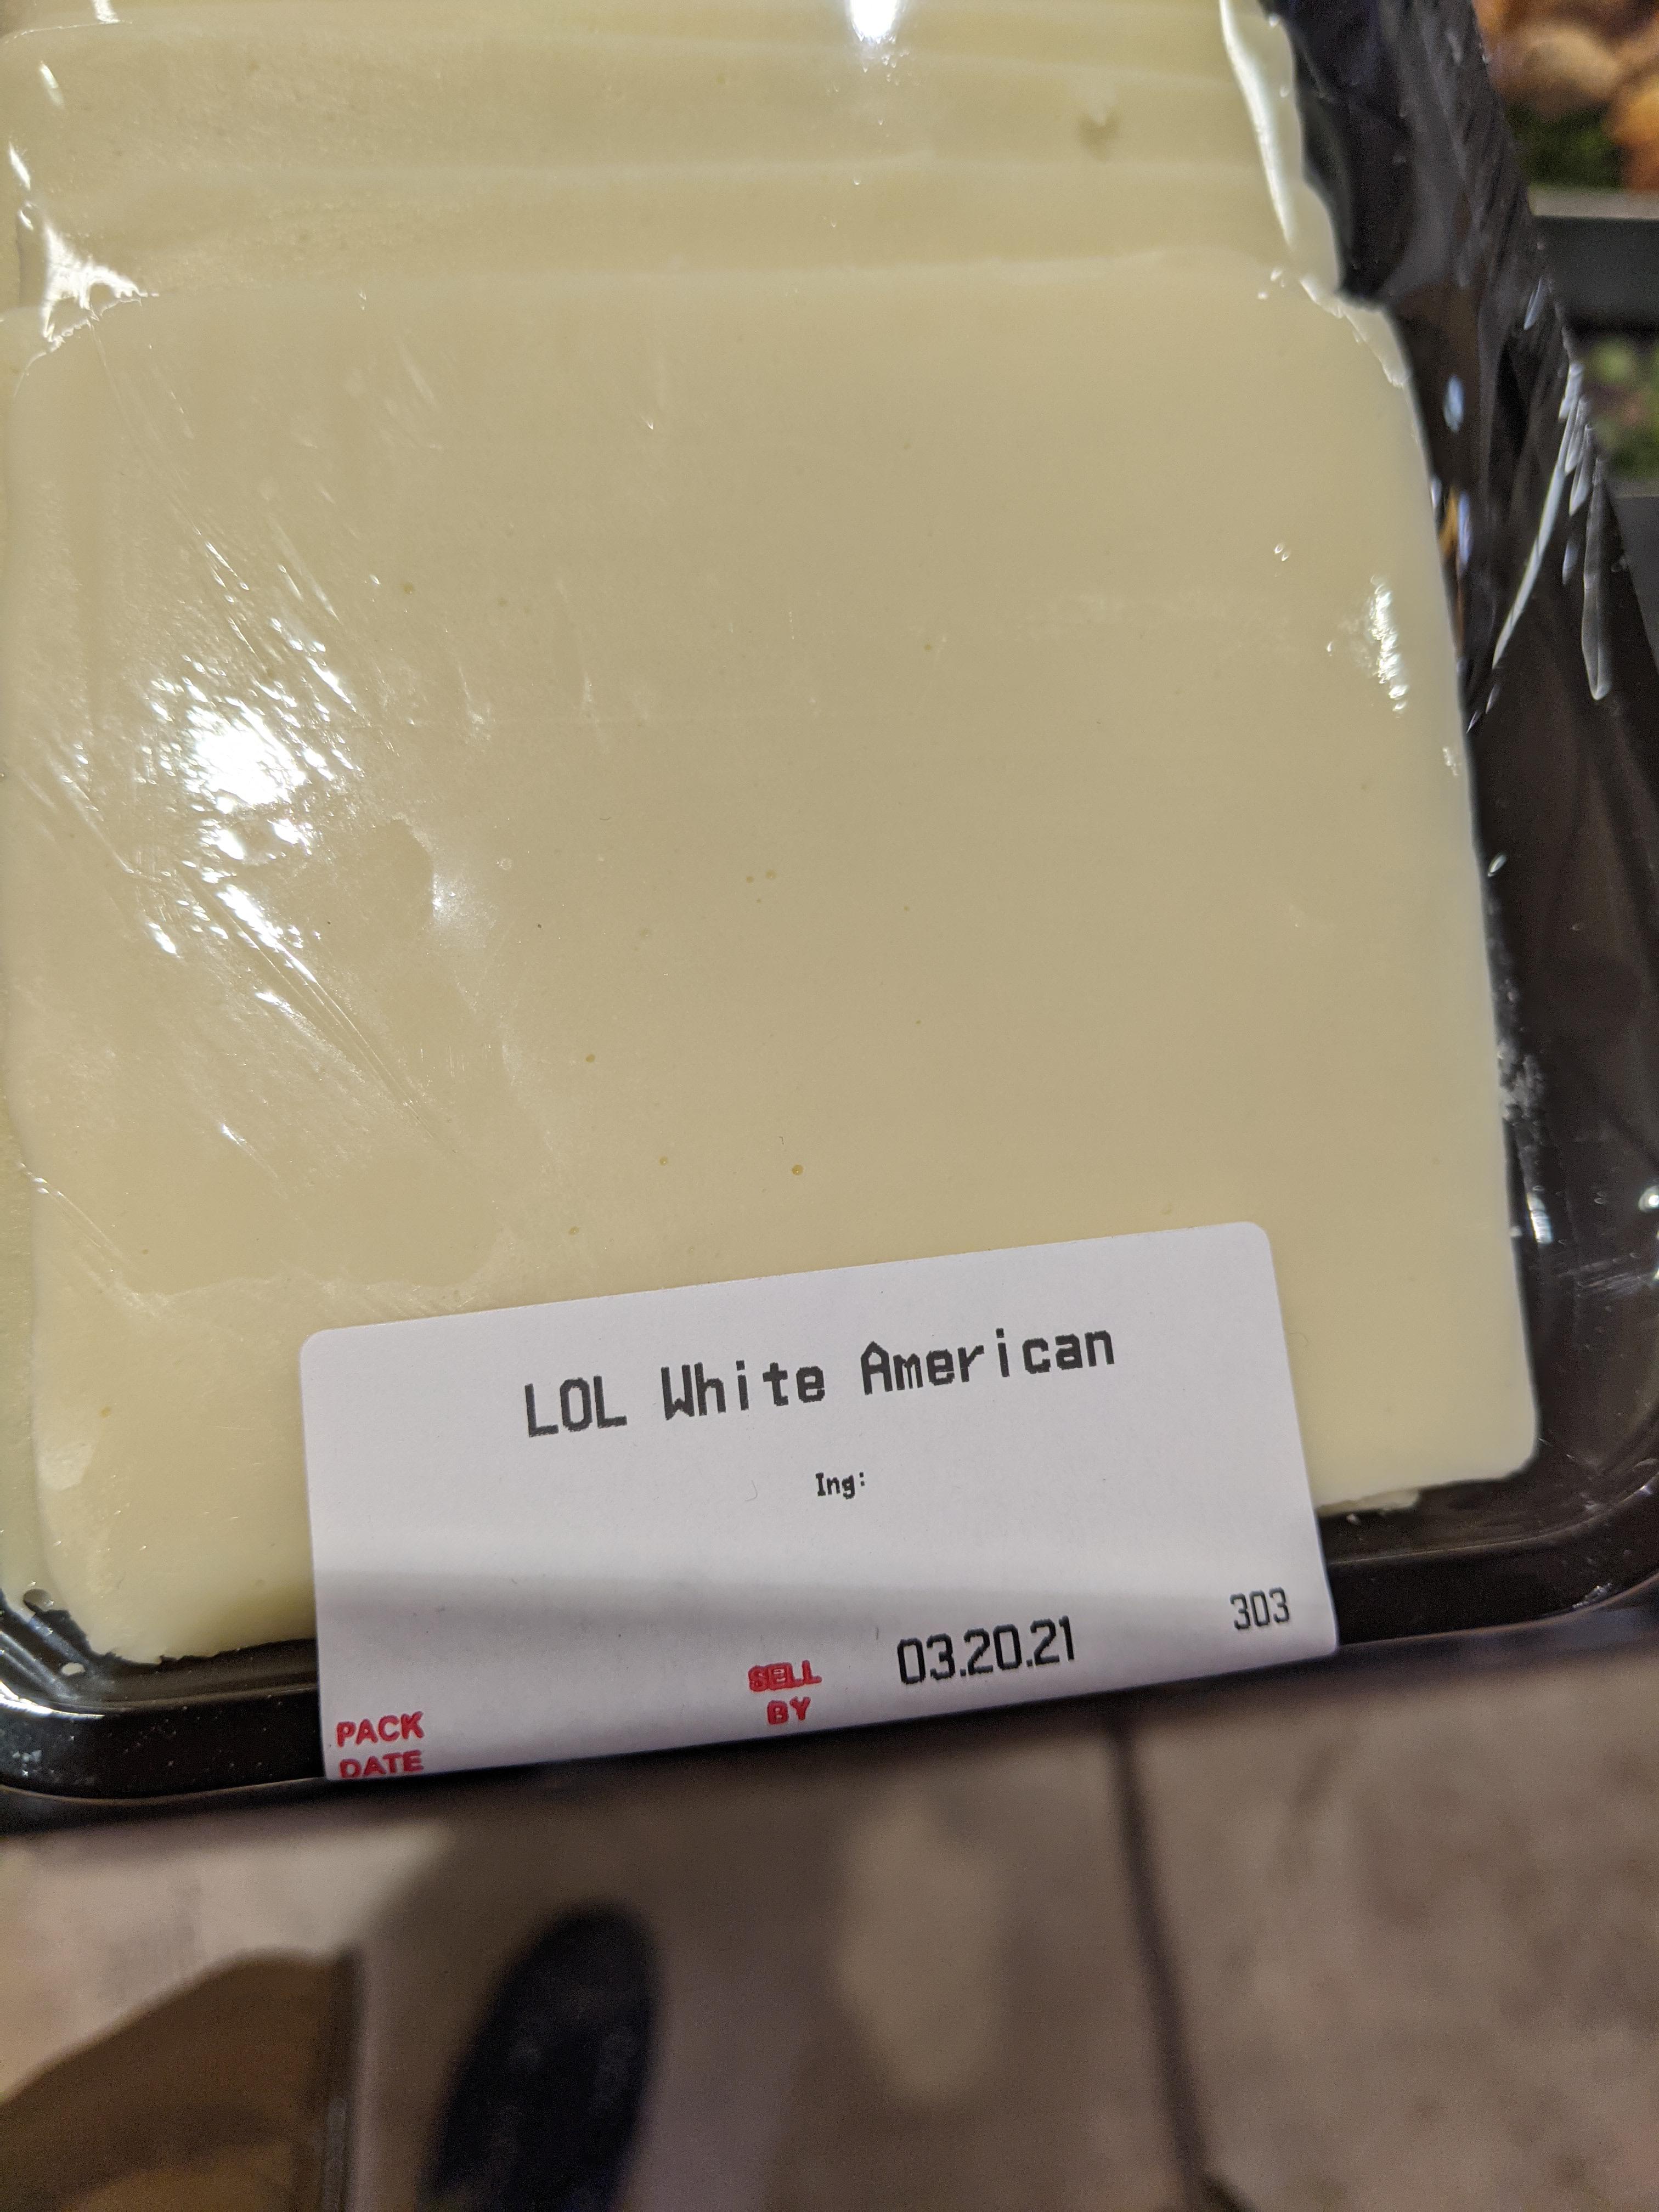 LOL White American [the cheese]